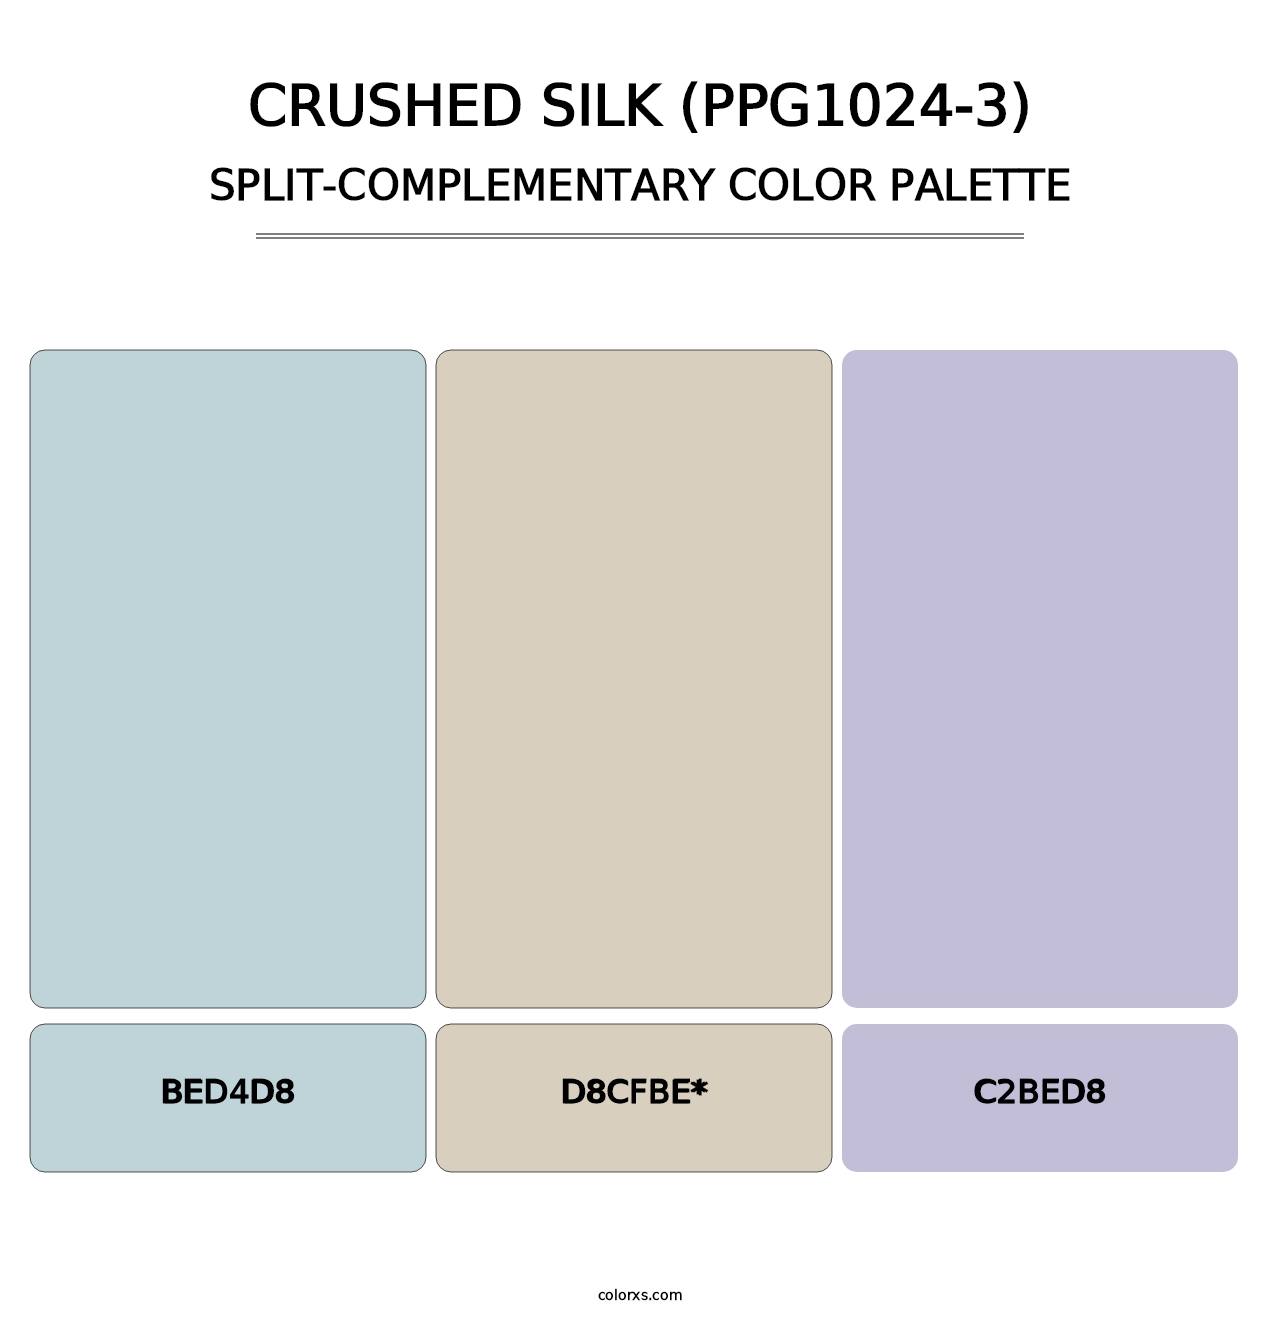 Crushed Silk (PPG1024-3) - Split-Complementary Color Palette